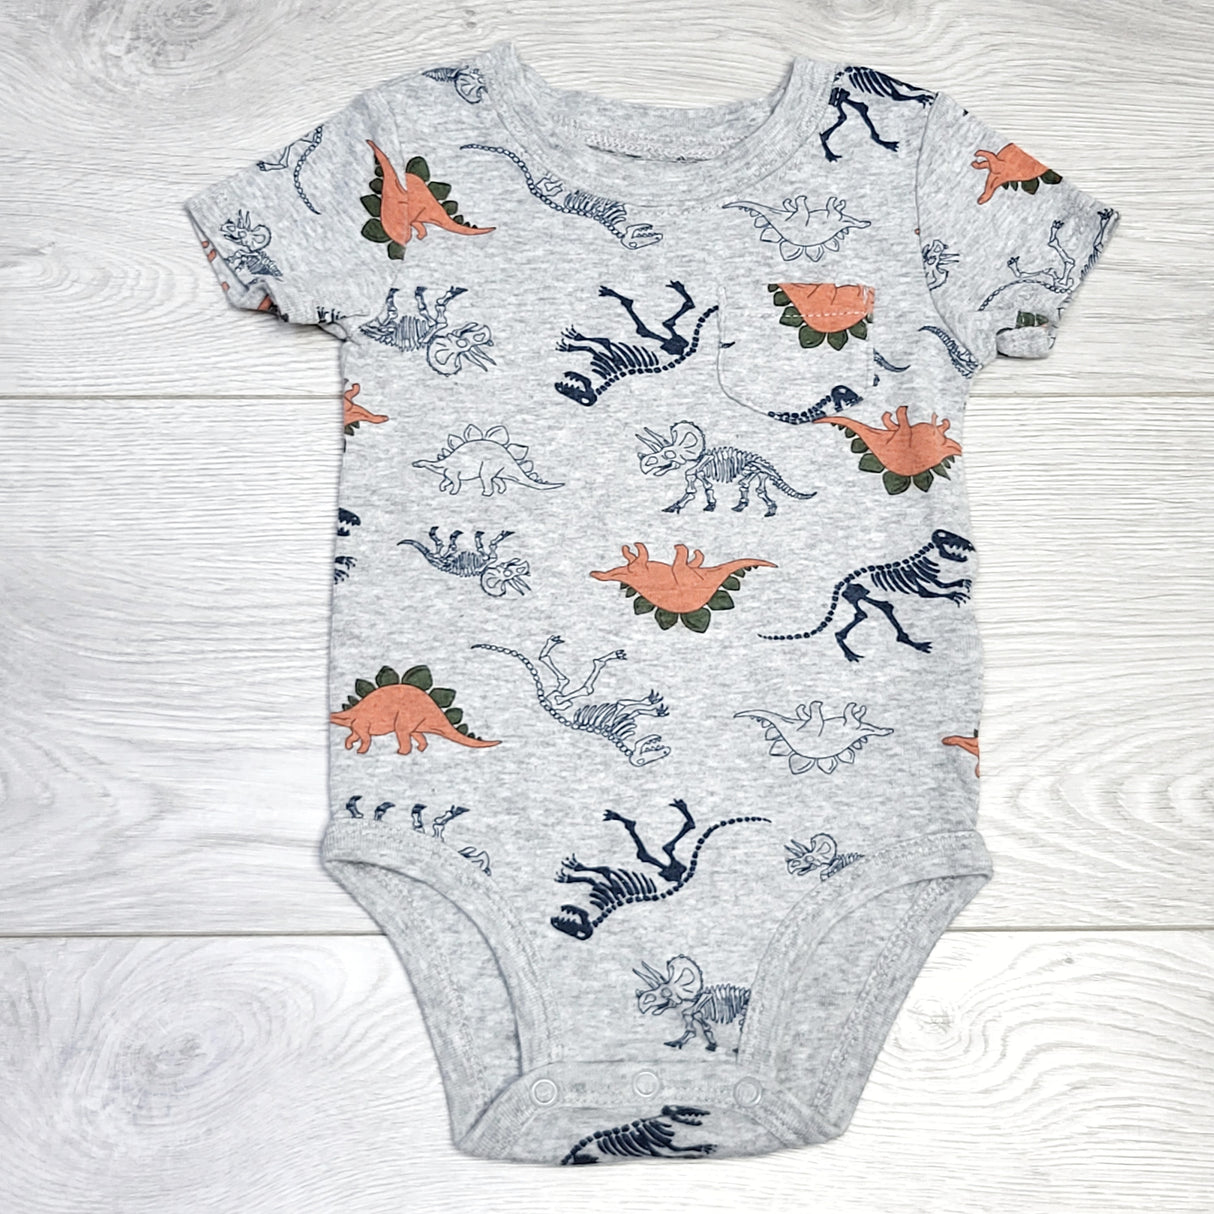 MSNDS11 - Carters grey onesie with dinosaurs. Size 9 months